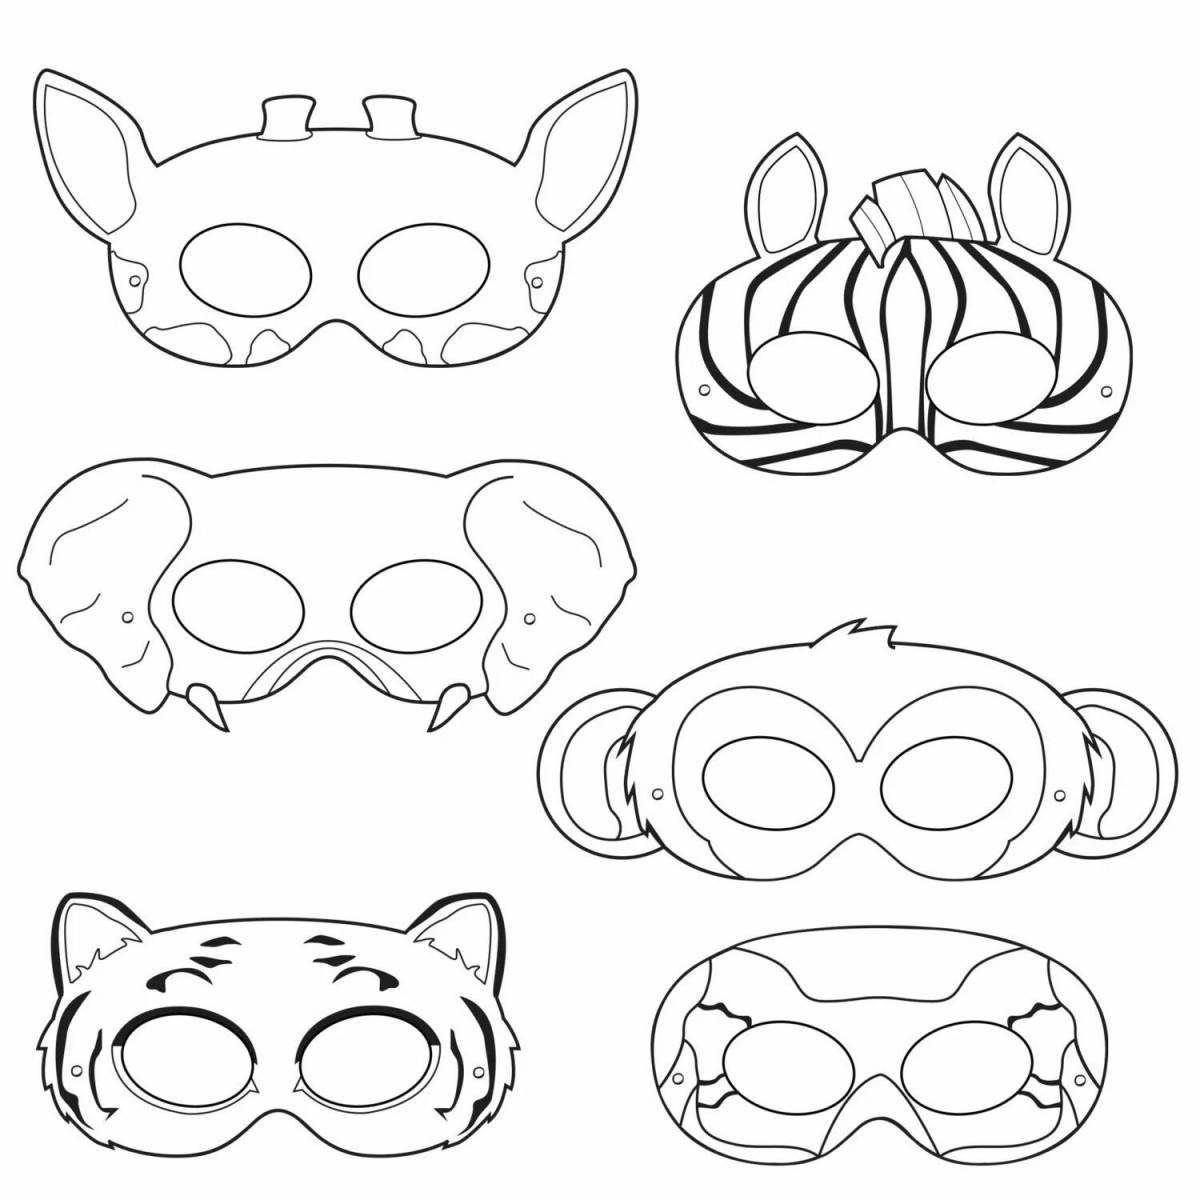 Colourful sleep mask coloring page